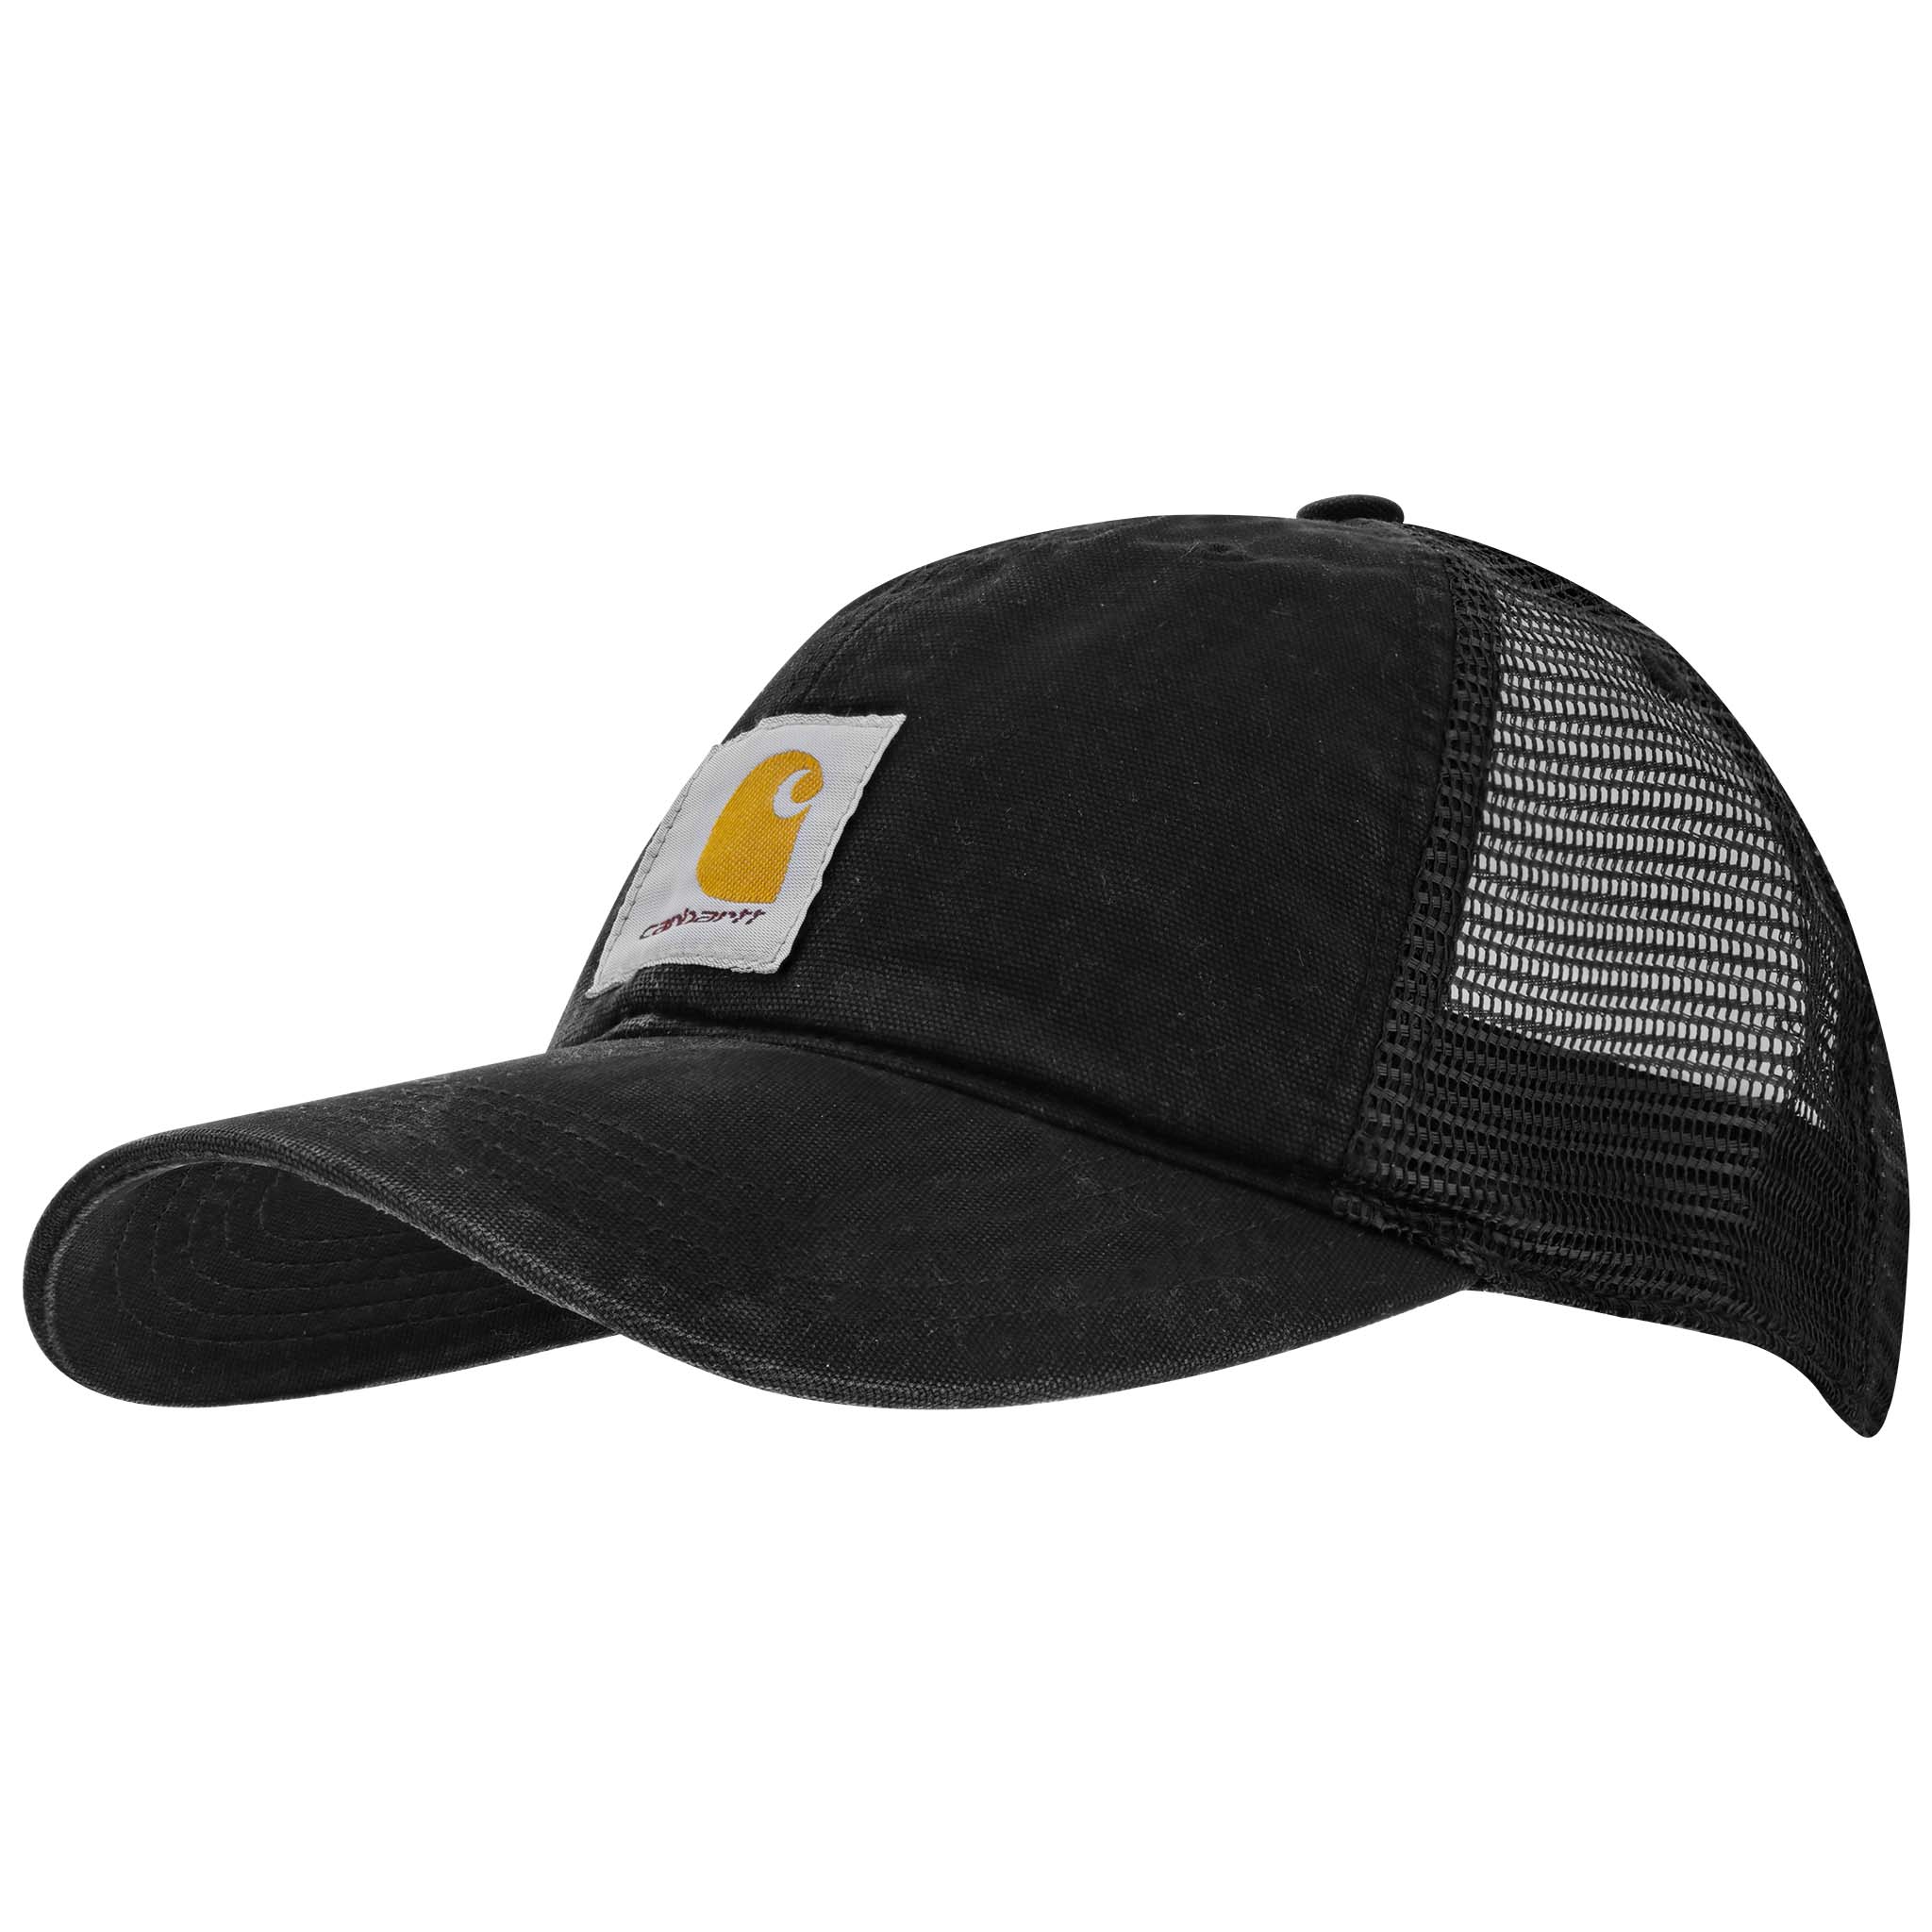 Mesh And Goods Black Cap Canvas Supply Back Gunthers -